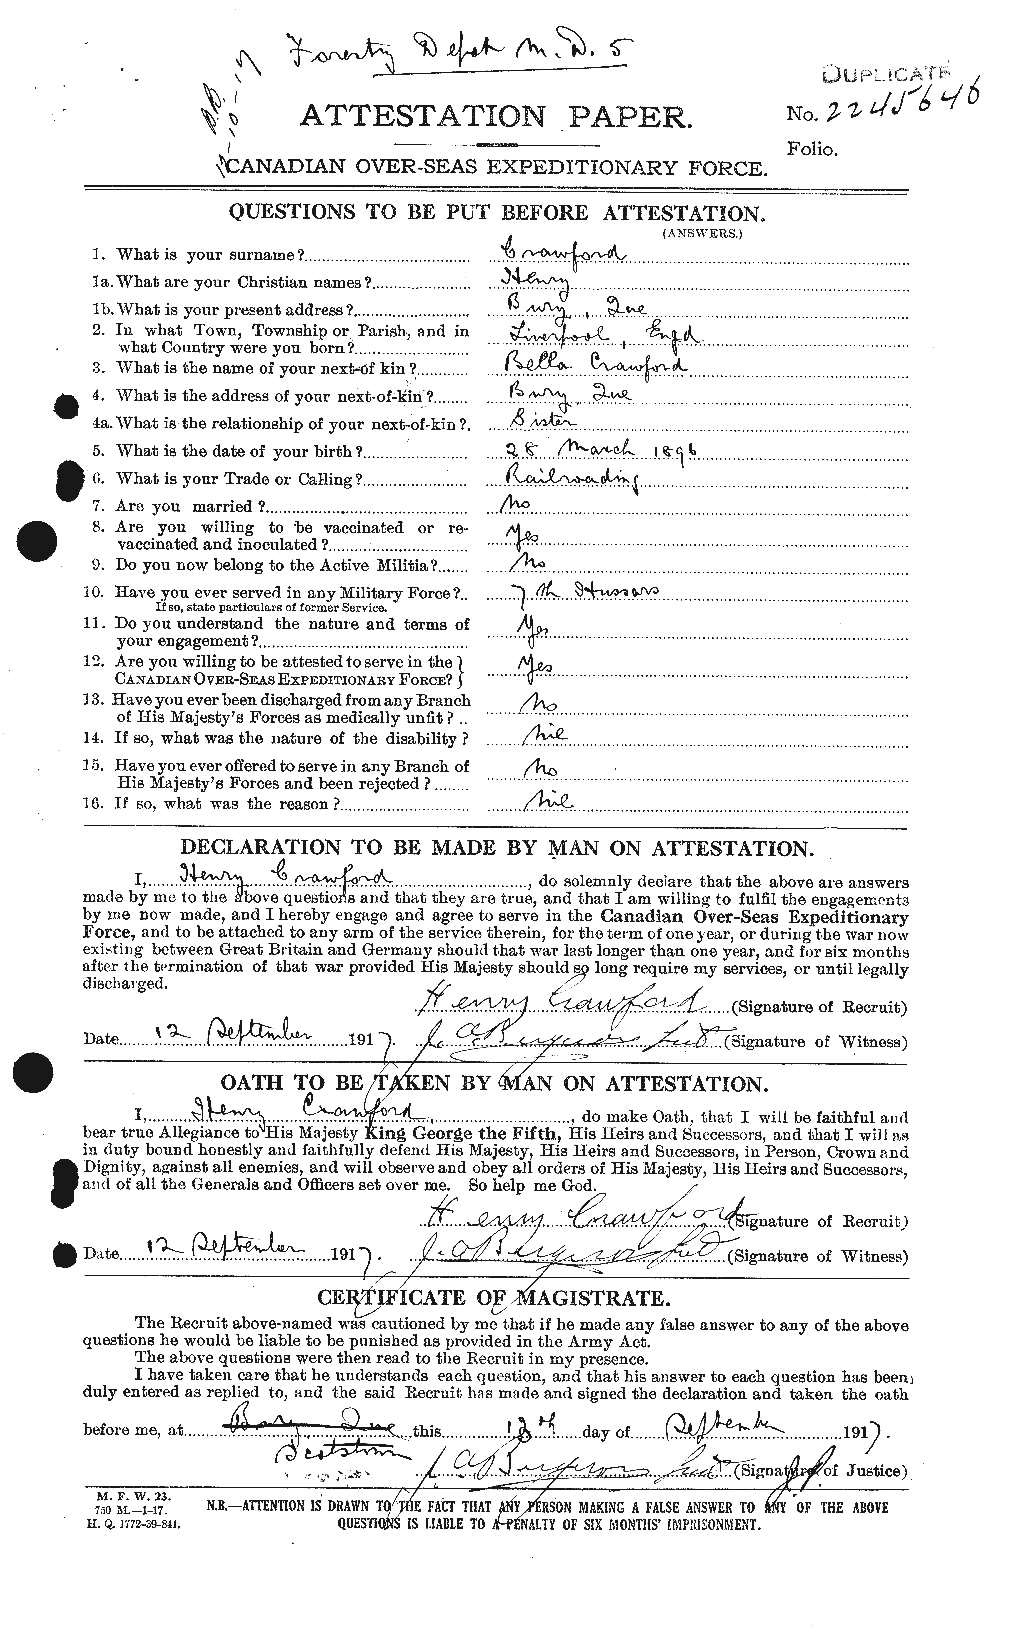 Personnel Records of the First World War - CEF 060573a